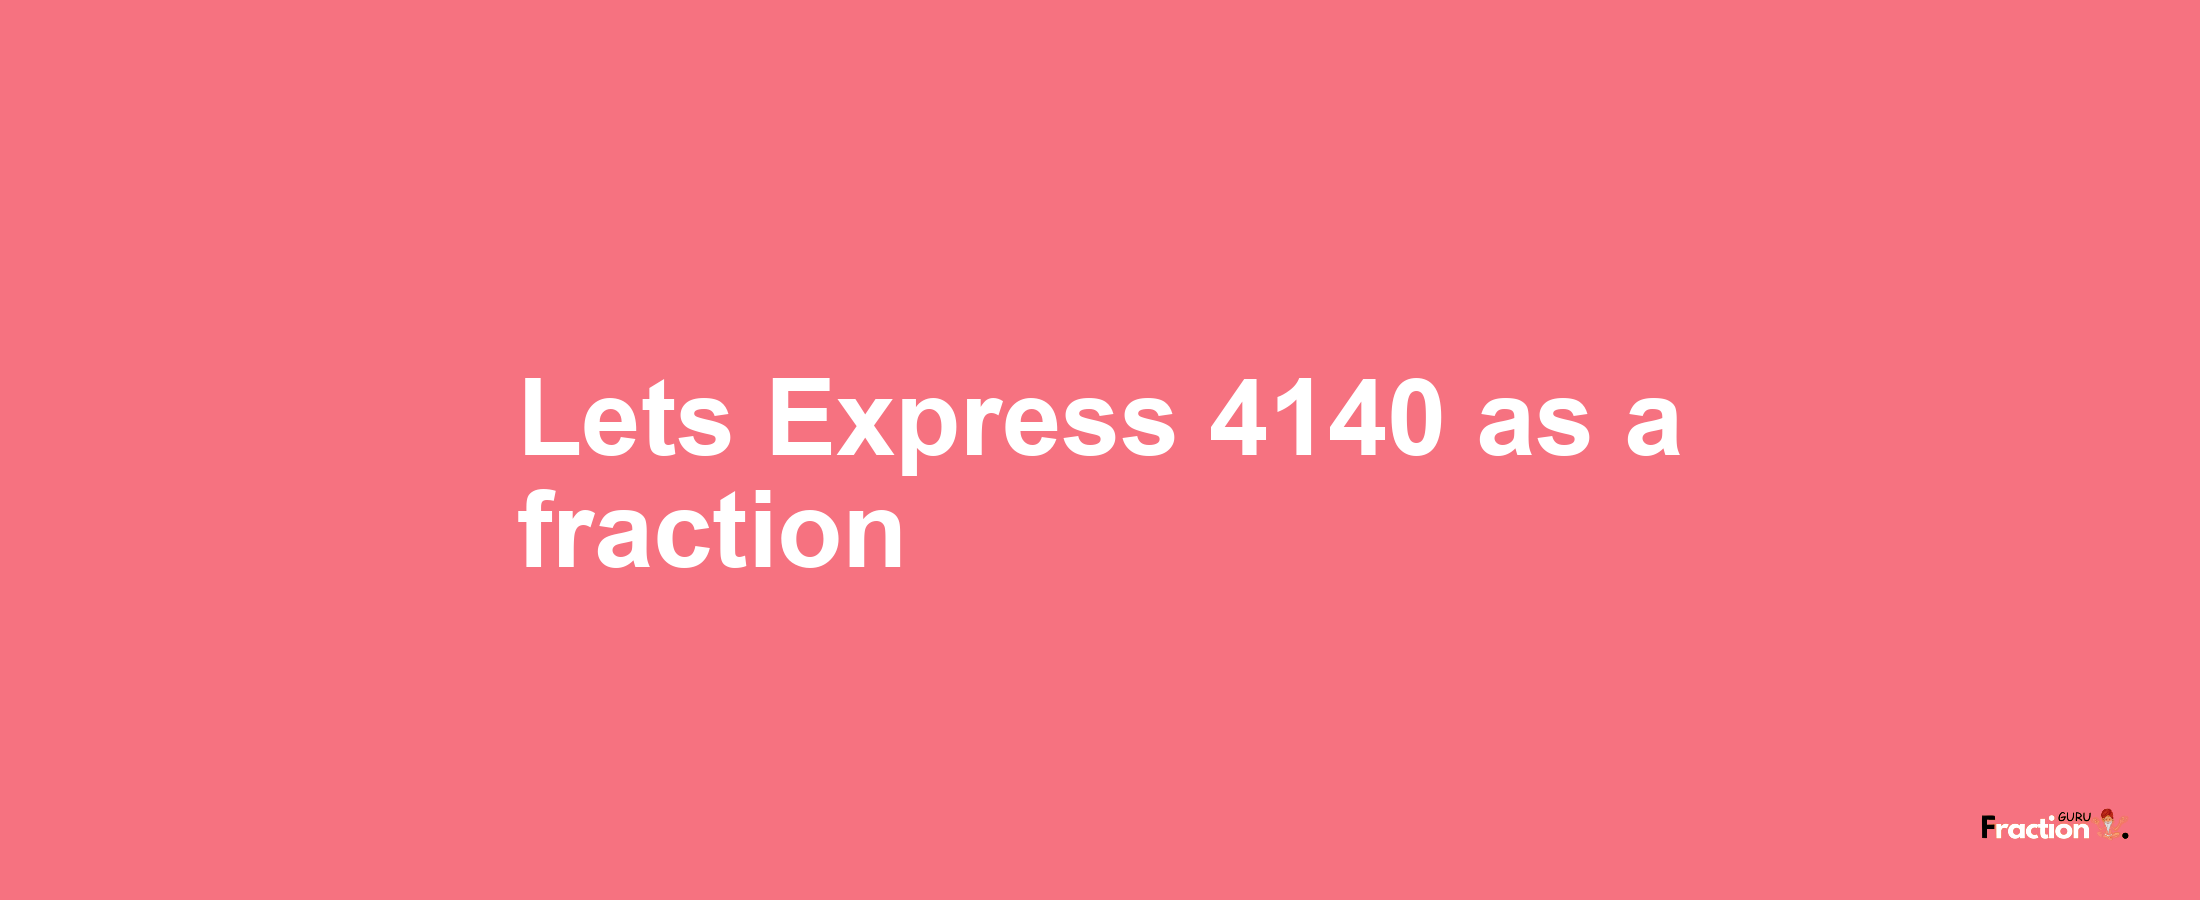 Lets Express 4140 as afraction